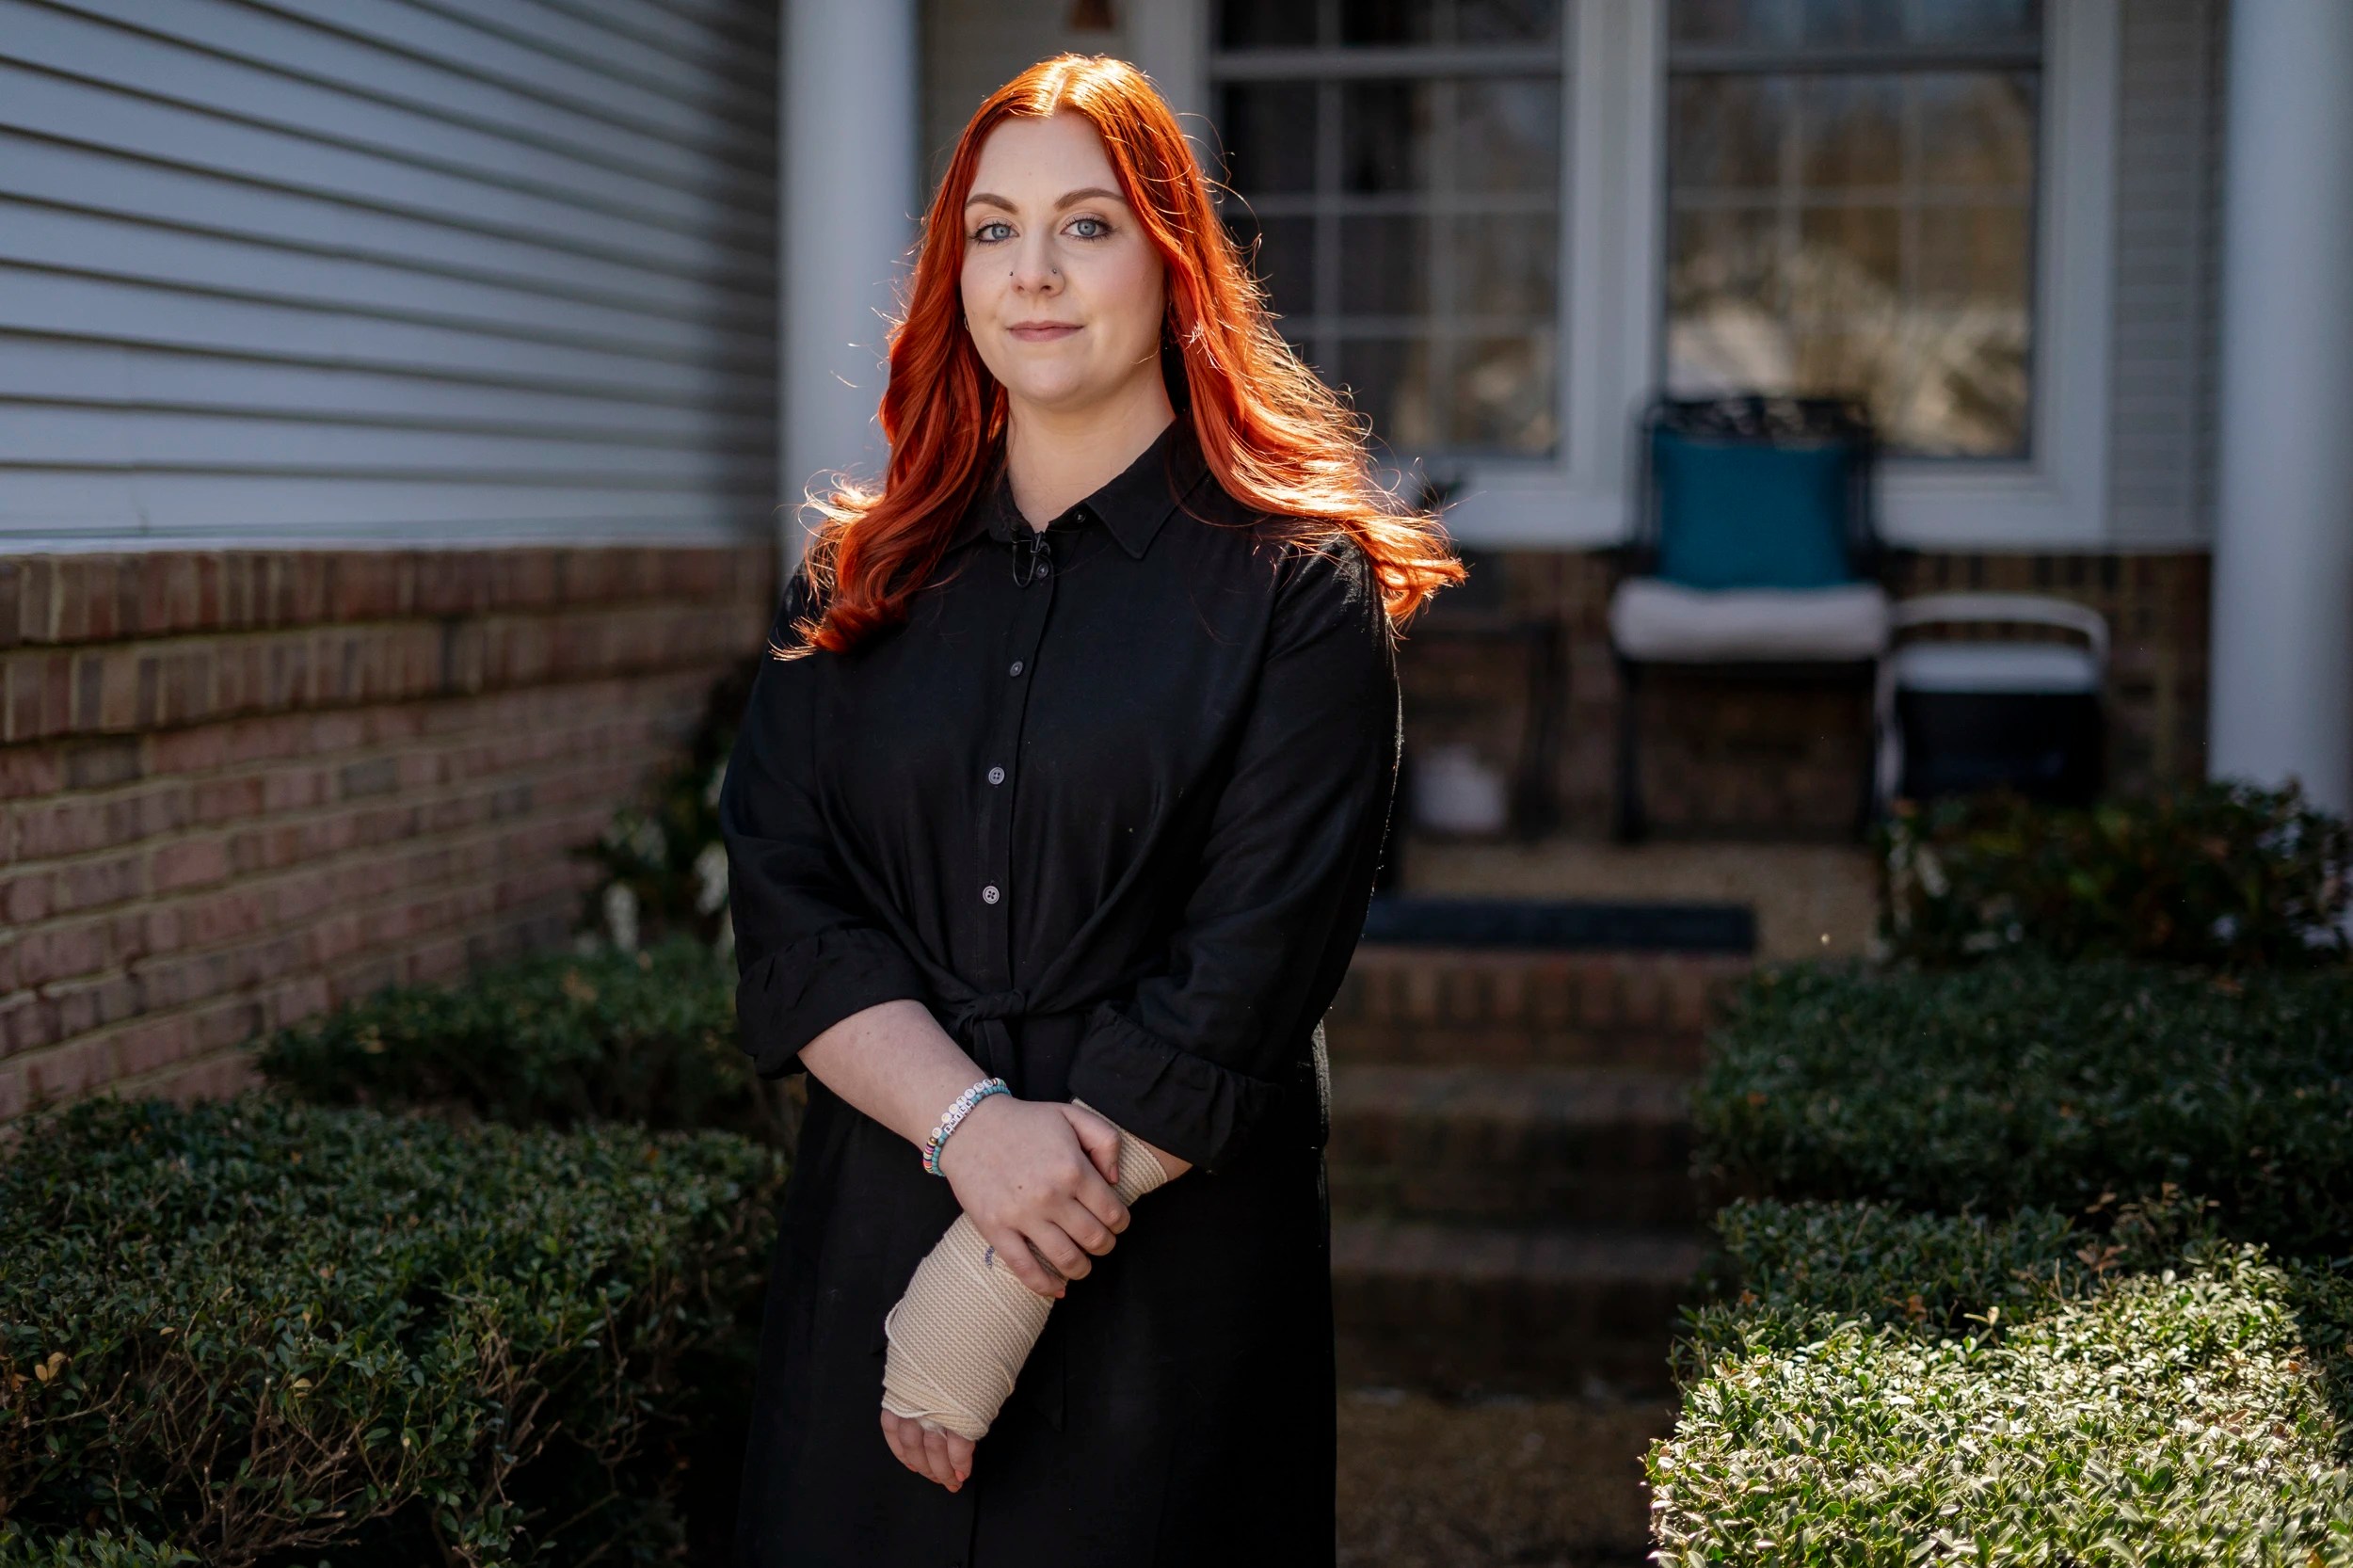 A photo of Abigail Zwerner. She has red hair and is wearing a black blouse, standing against the sun in front of a white house. 